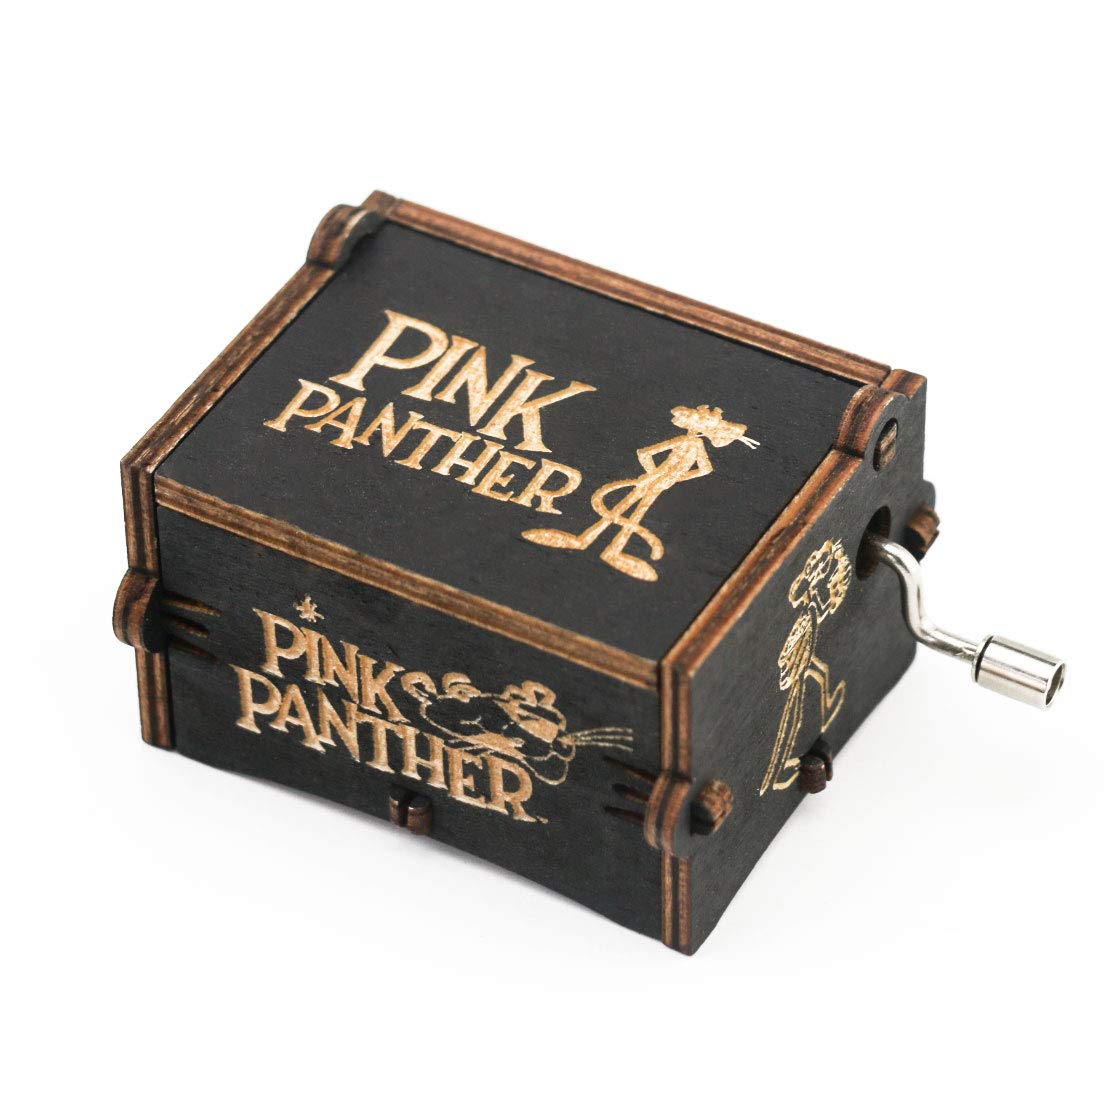 Pink Panther Music Box Hand Crank Carved Wooden Musical Box,Musical Gift,Play Pink Panther Theme wooden music box